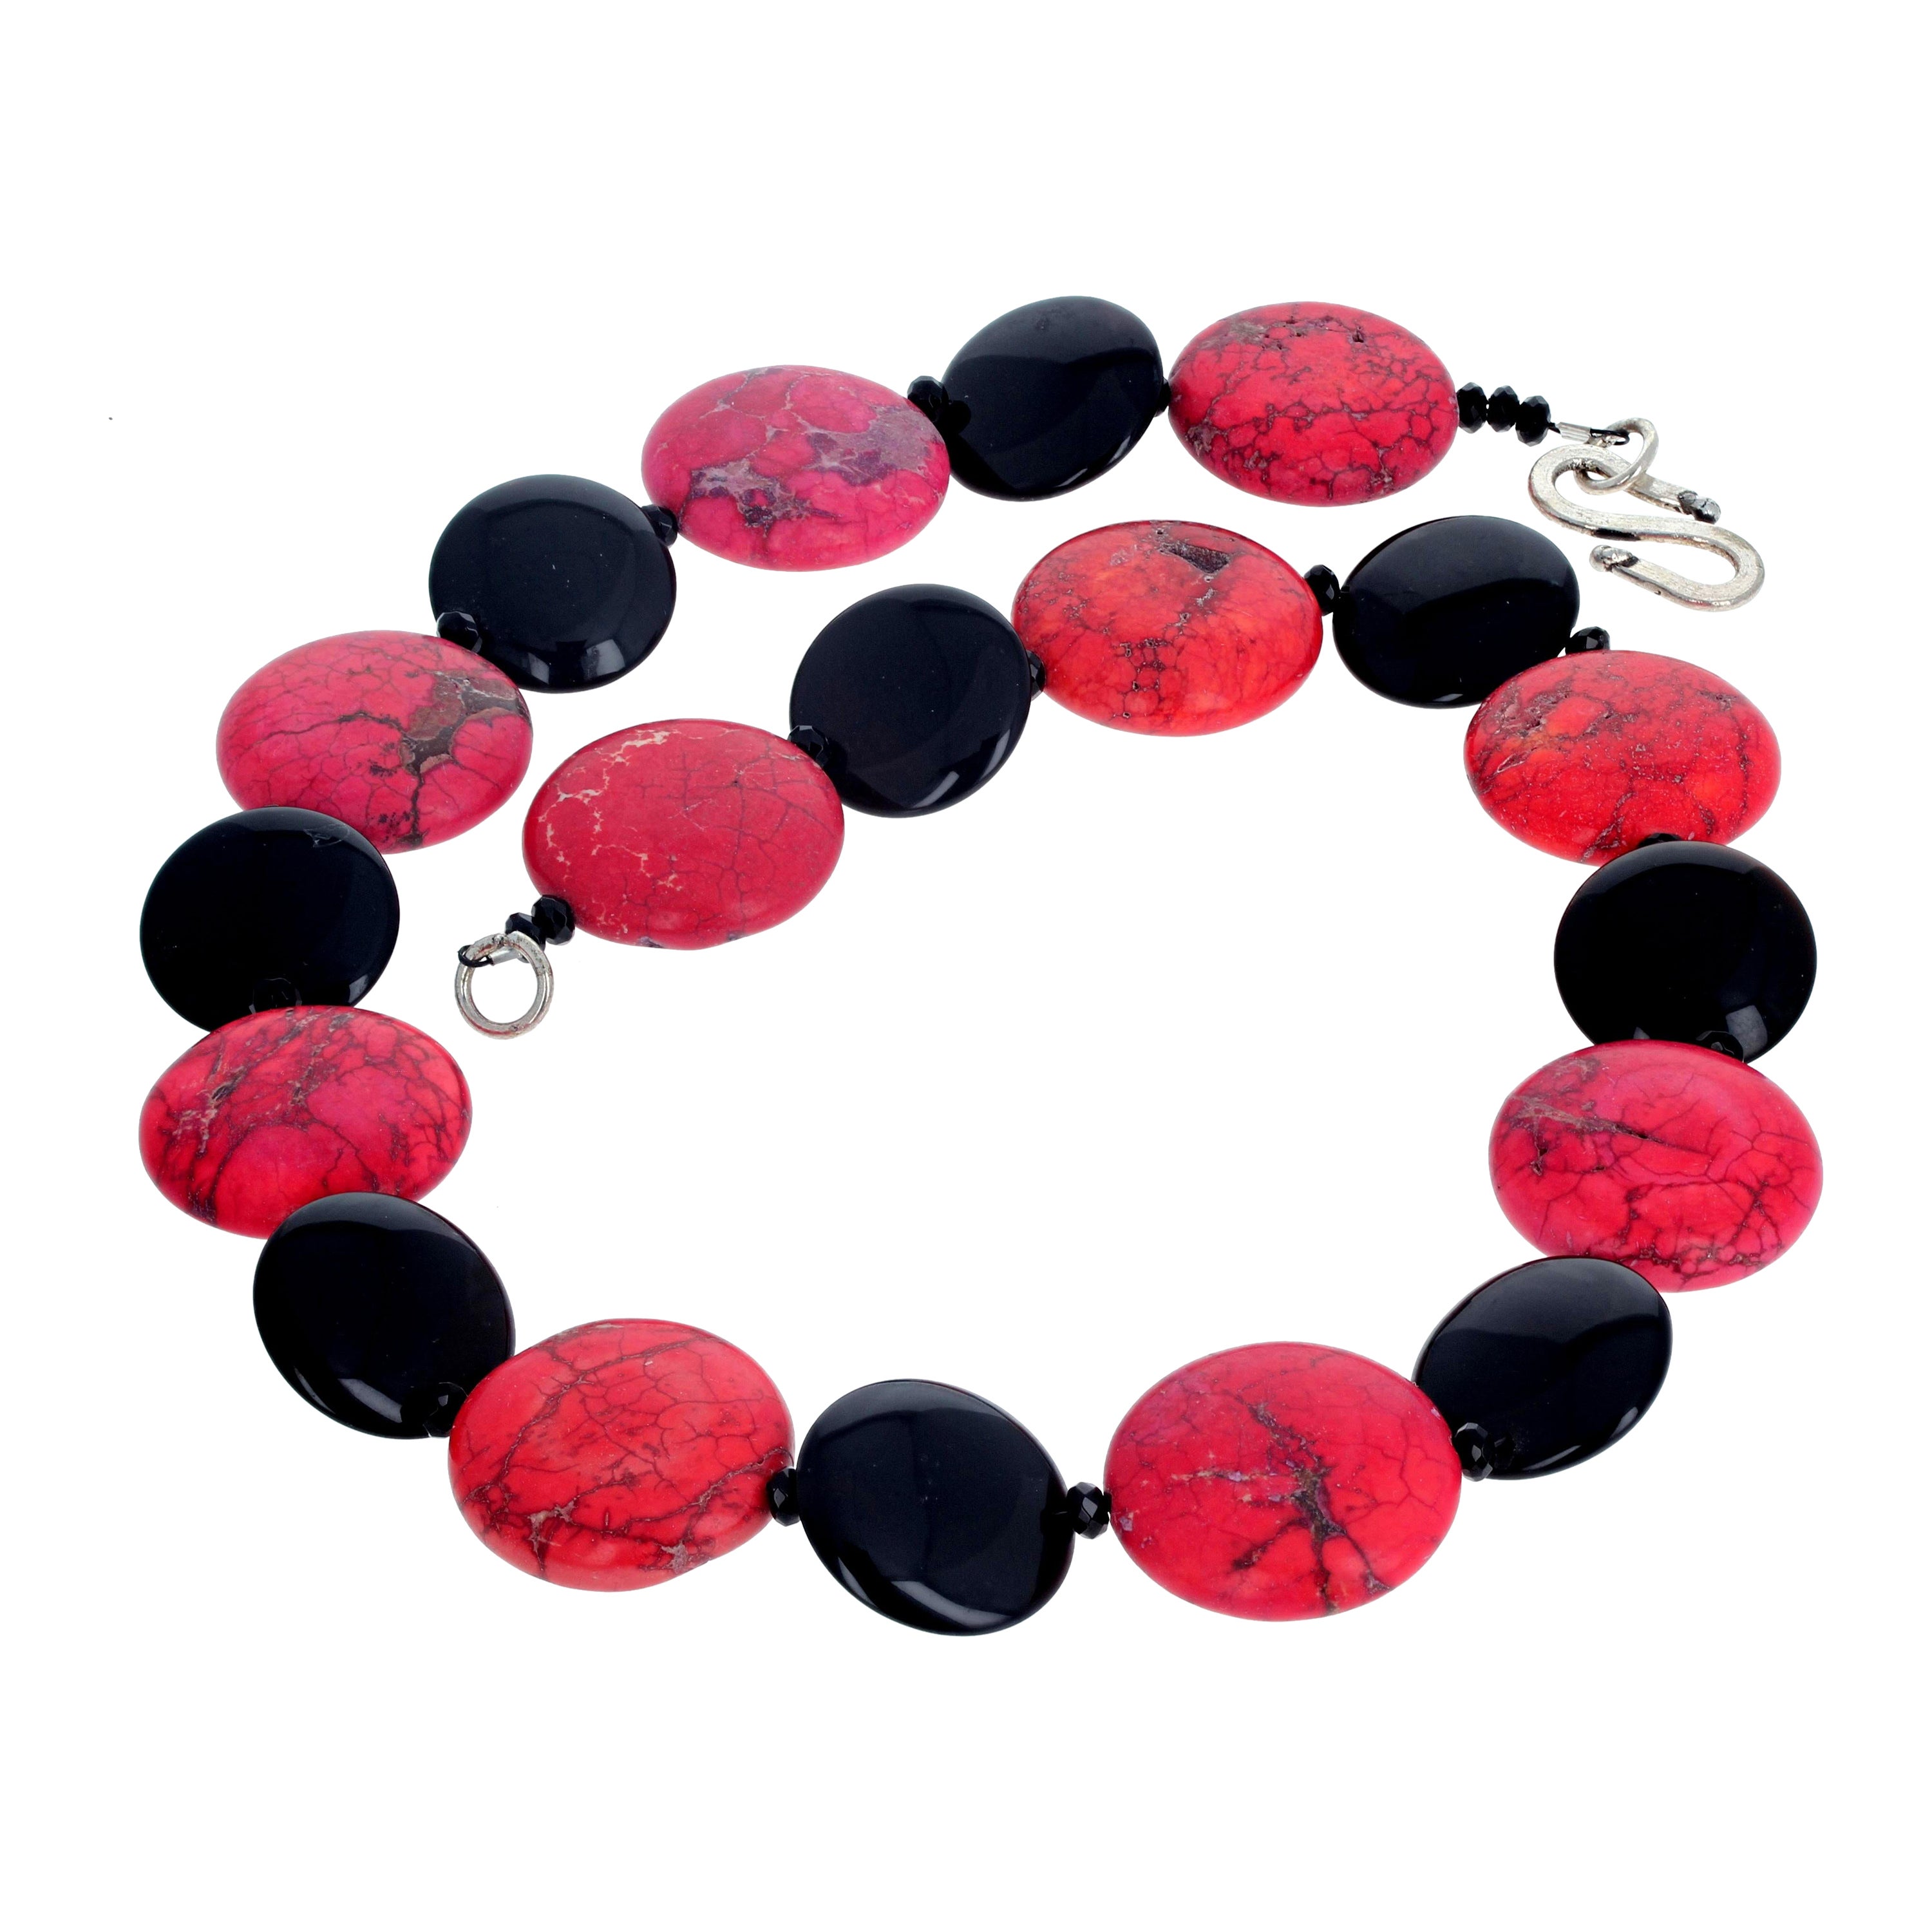 AJD Fascinating Statement Necklace of Real Red Howlite & Bright Black Onyx